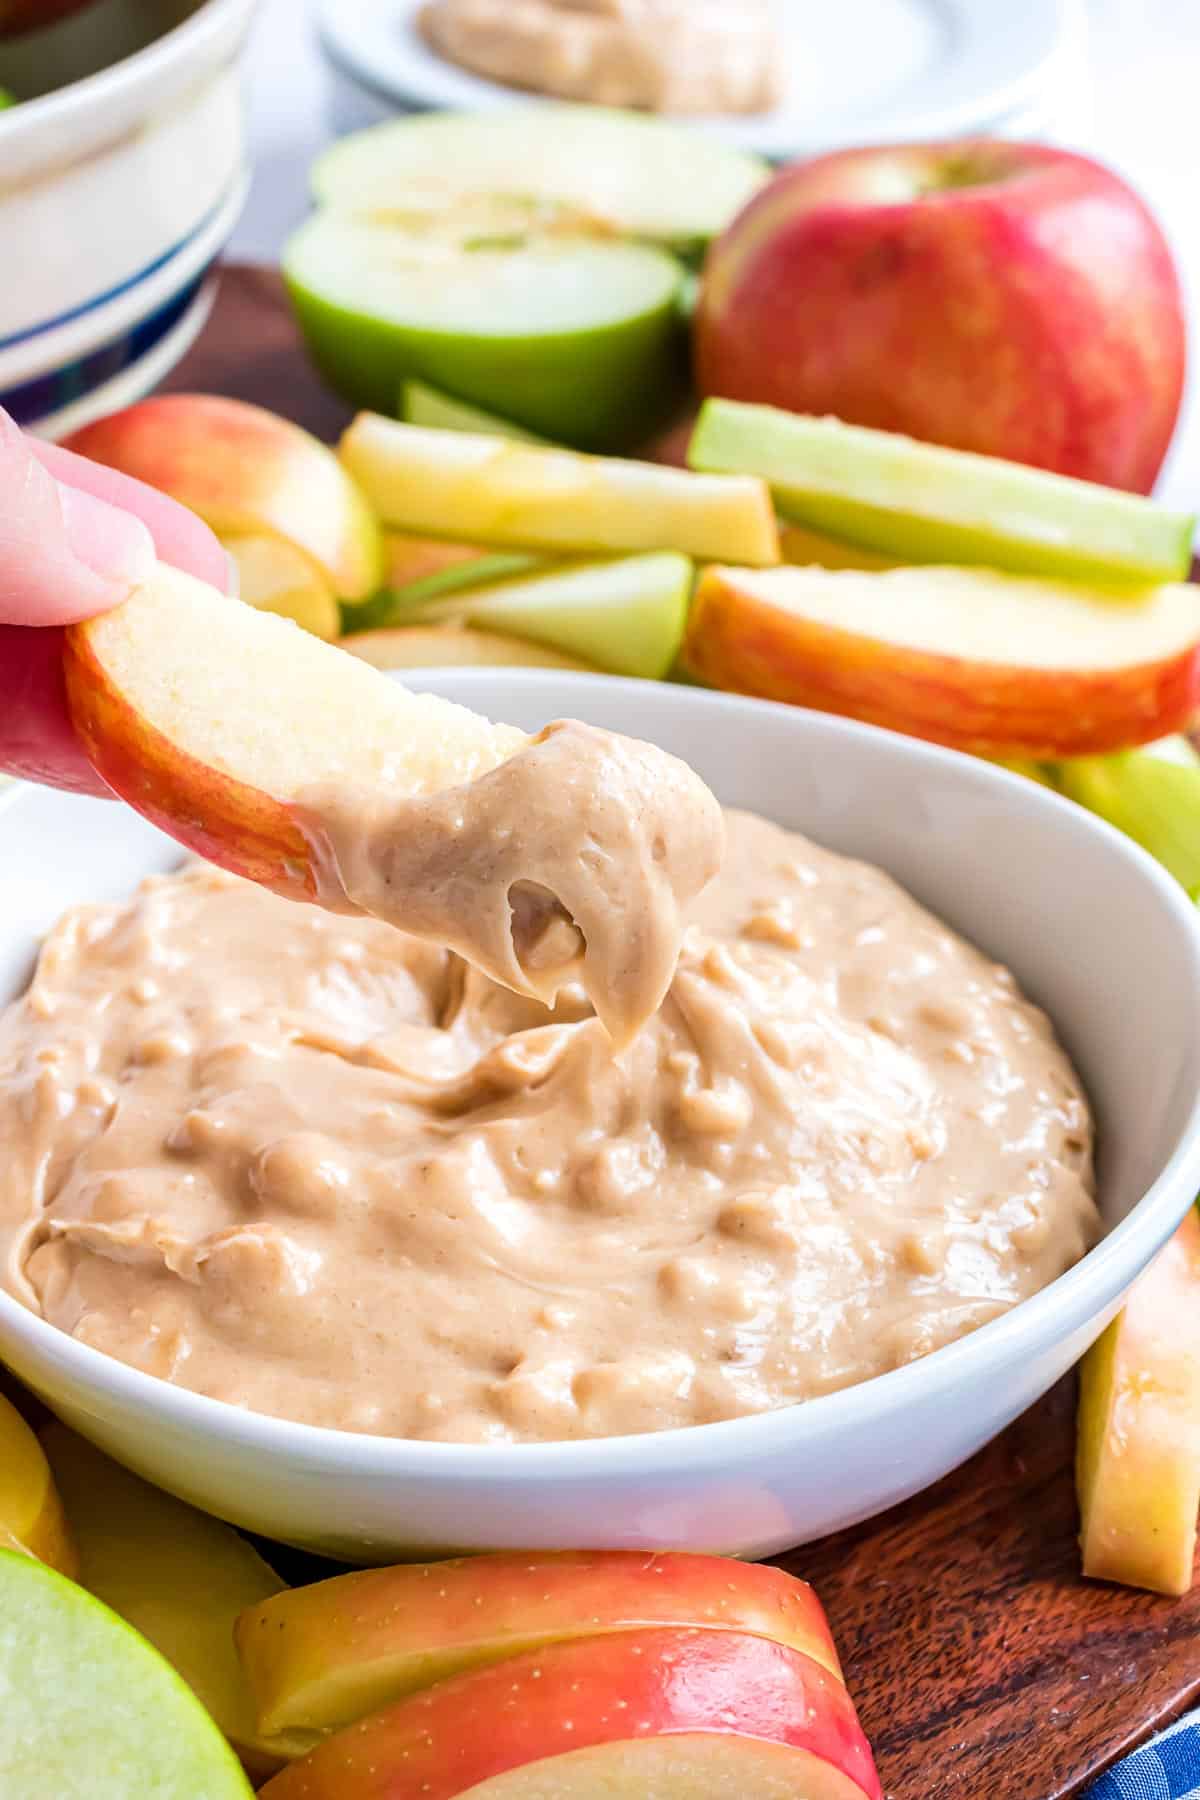 Apple dip with peanut butter, on an apple slice.